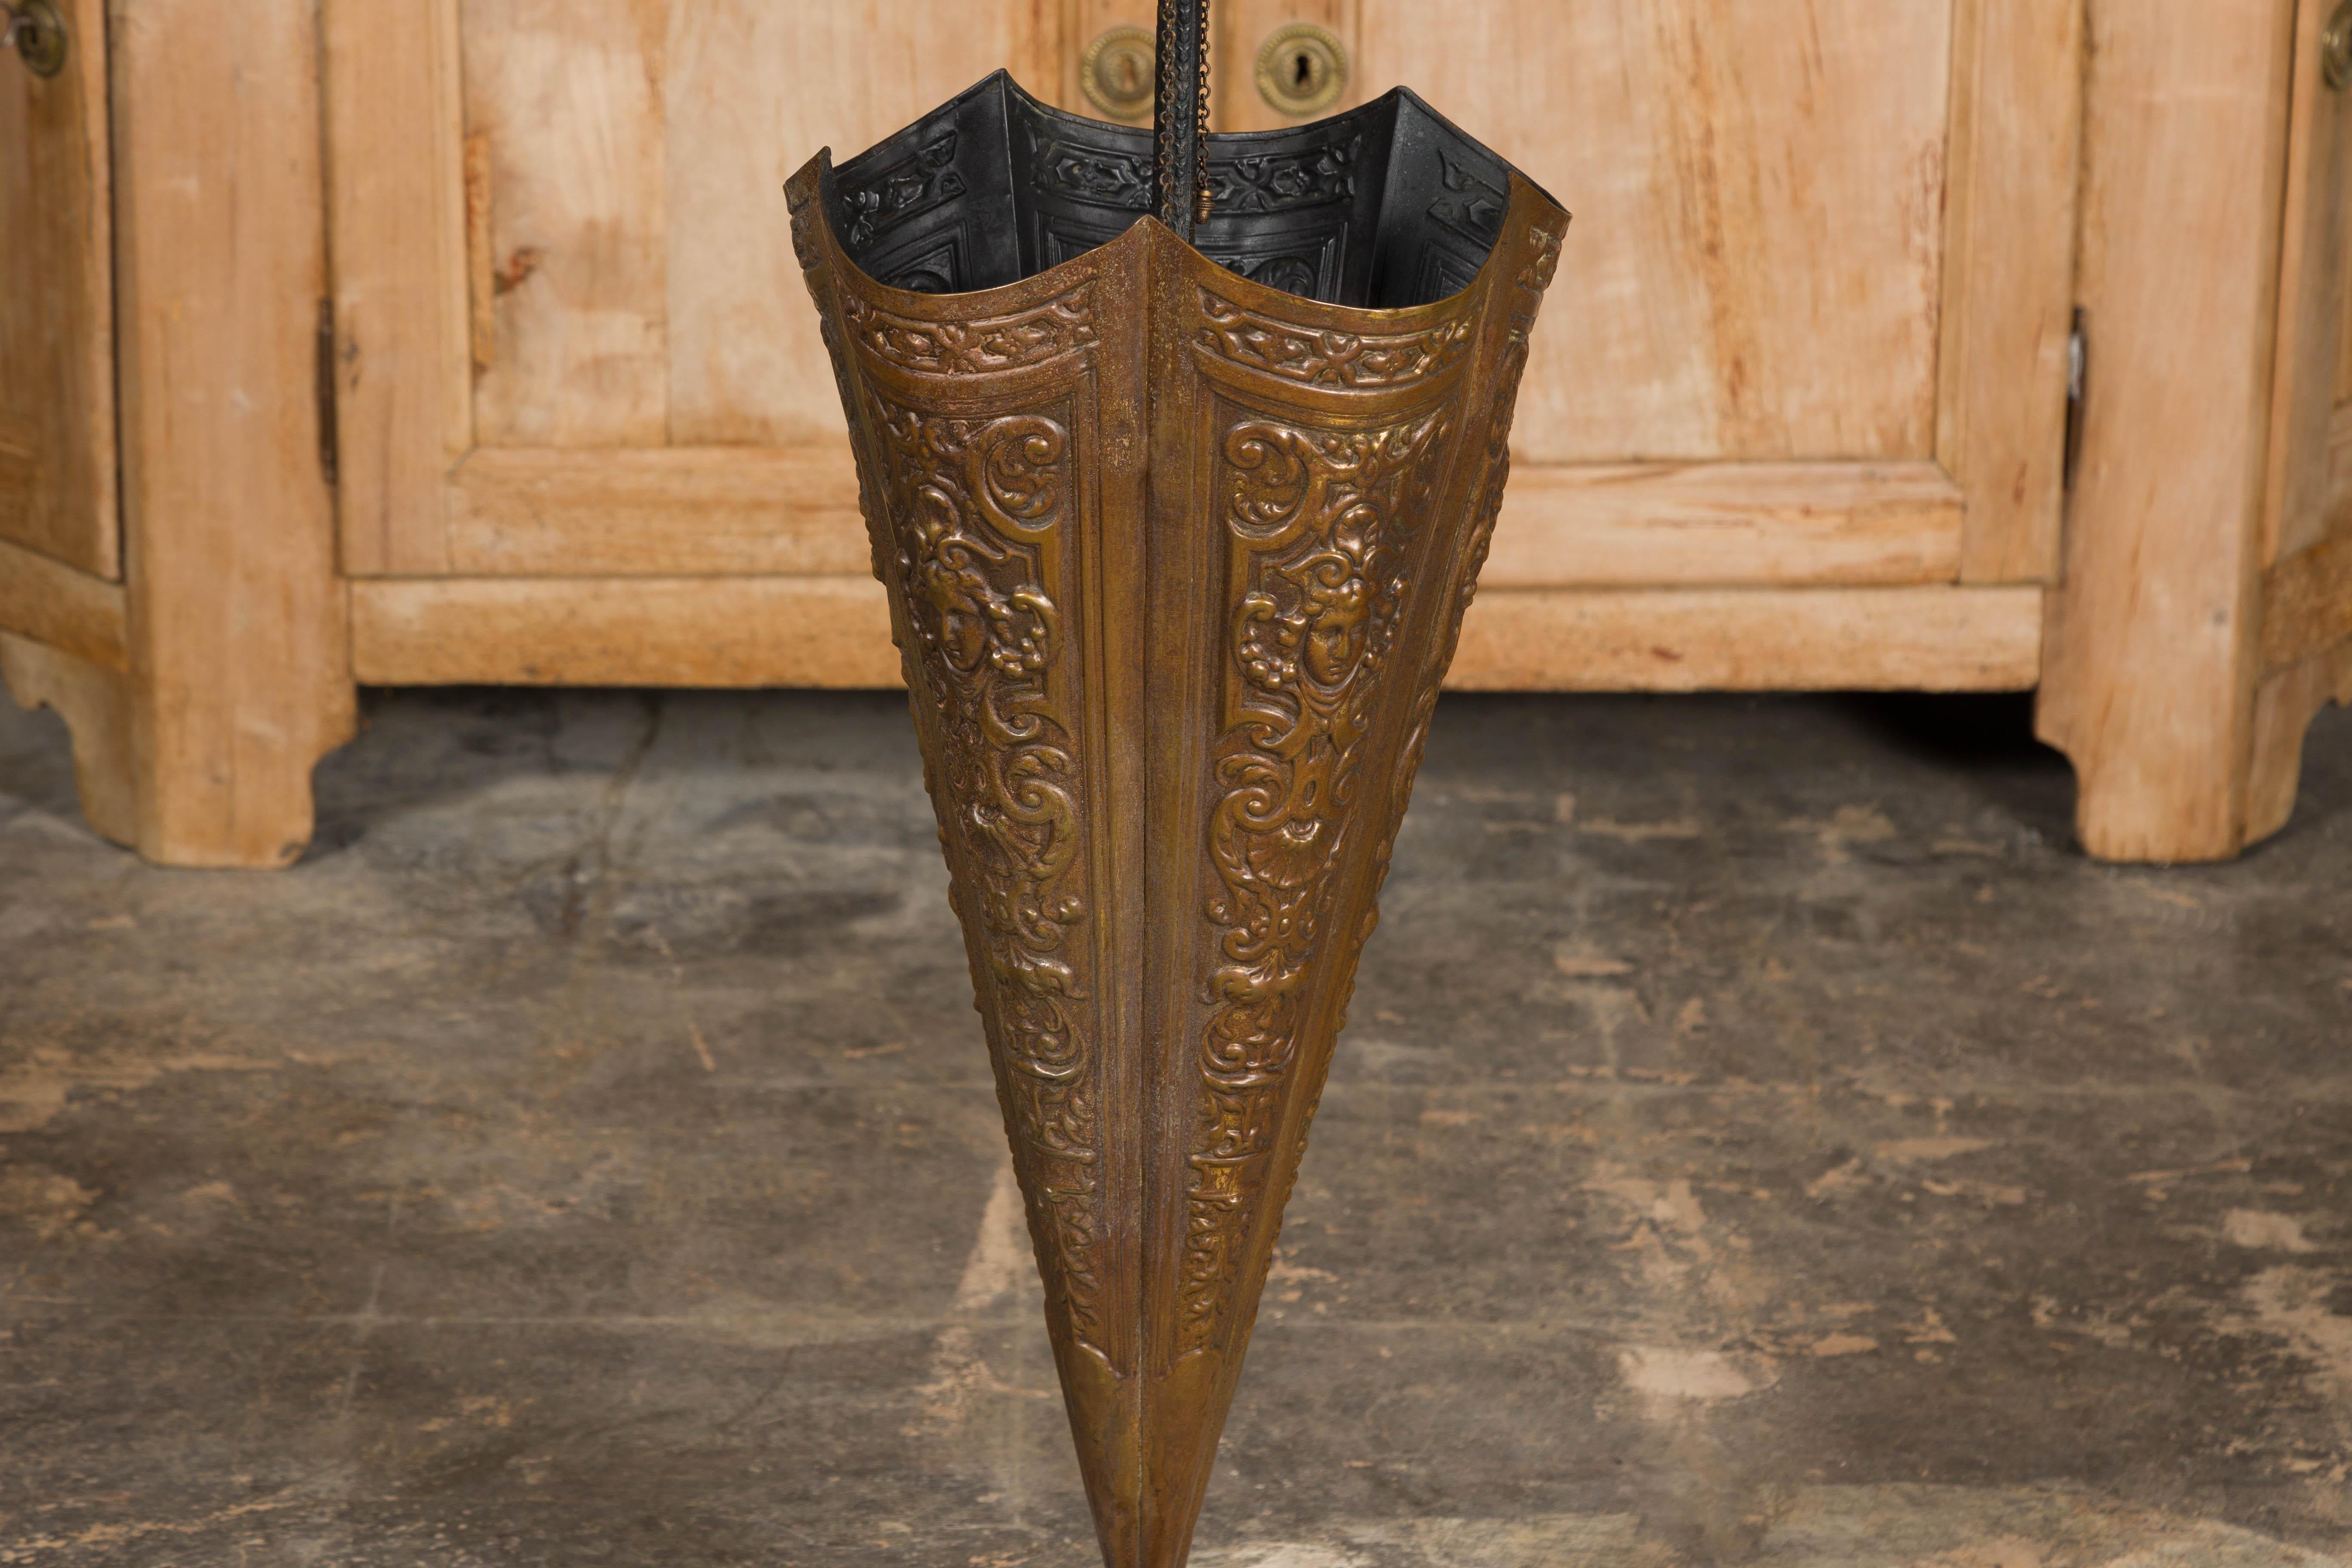 English 1920-1930 Brass Umbrella Stand with Raised Motifs and Tripartite Base For Sale 2